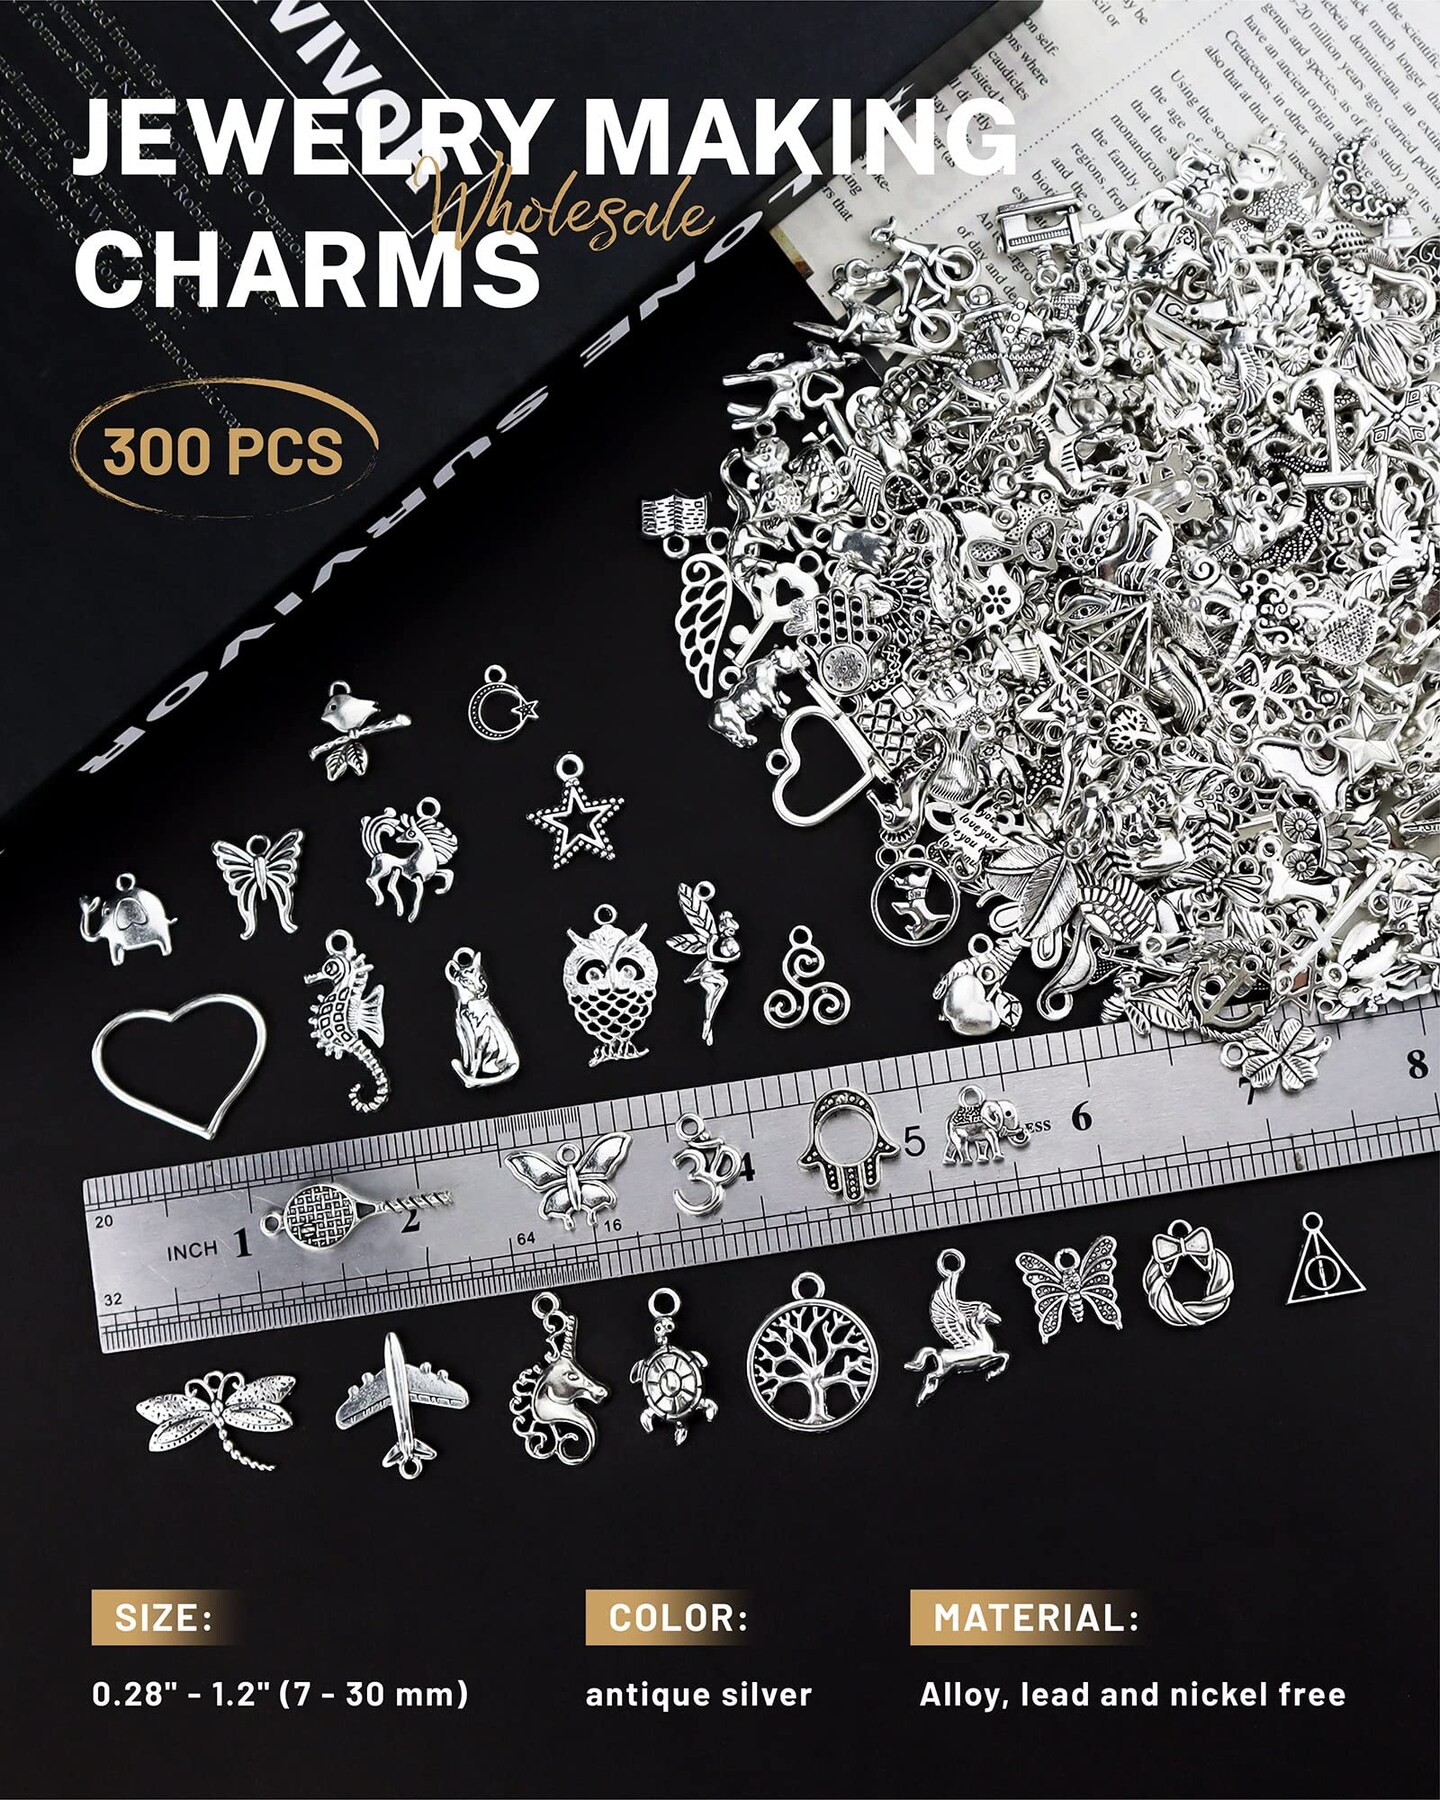 76 PCS Wholesale Bulk Lots Jewelry Making Antique Charms Mixed Stars and  Moons Smooth Bronze Metal Charms Pendants DIY for Necklace Bracelet Jewelry  Making and Crafting